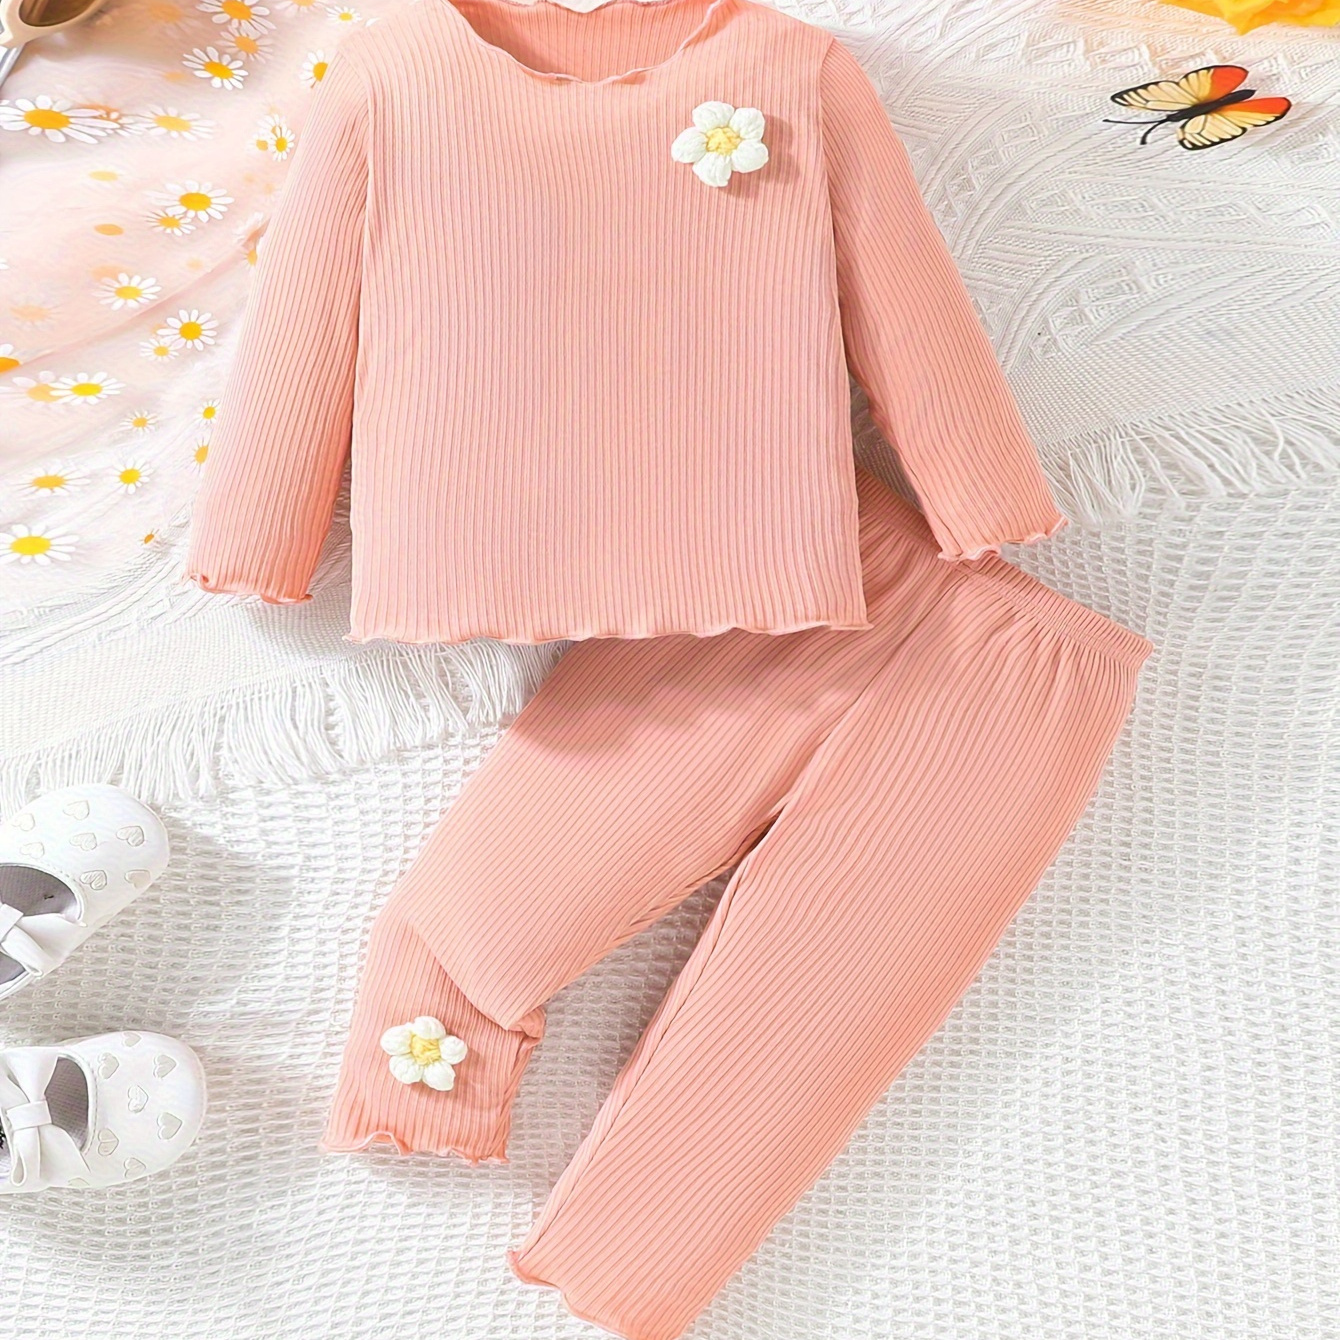 

Baby's Flower Decor 2pcs Casual Outfit, Ribbed Long Sleeve Top & Solid Color Pants Set, Toddler & Infant Girl's Clothes For Daily/holiday/party